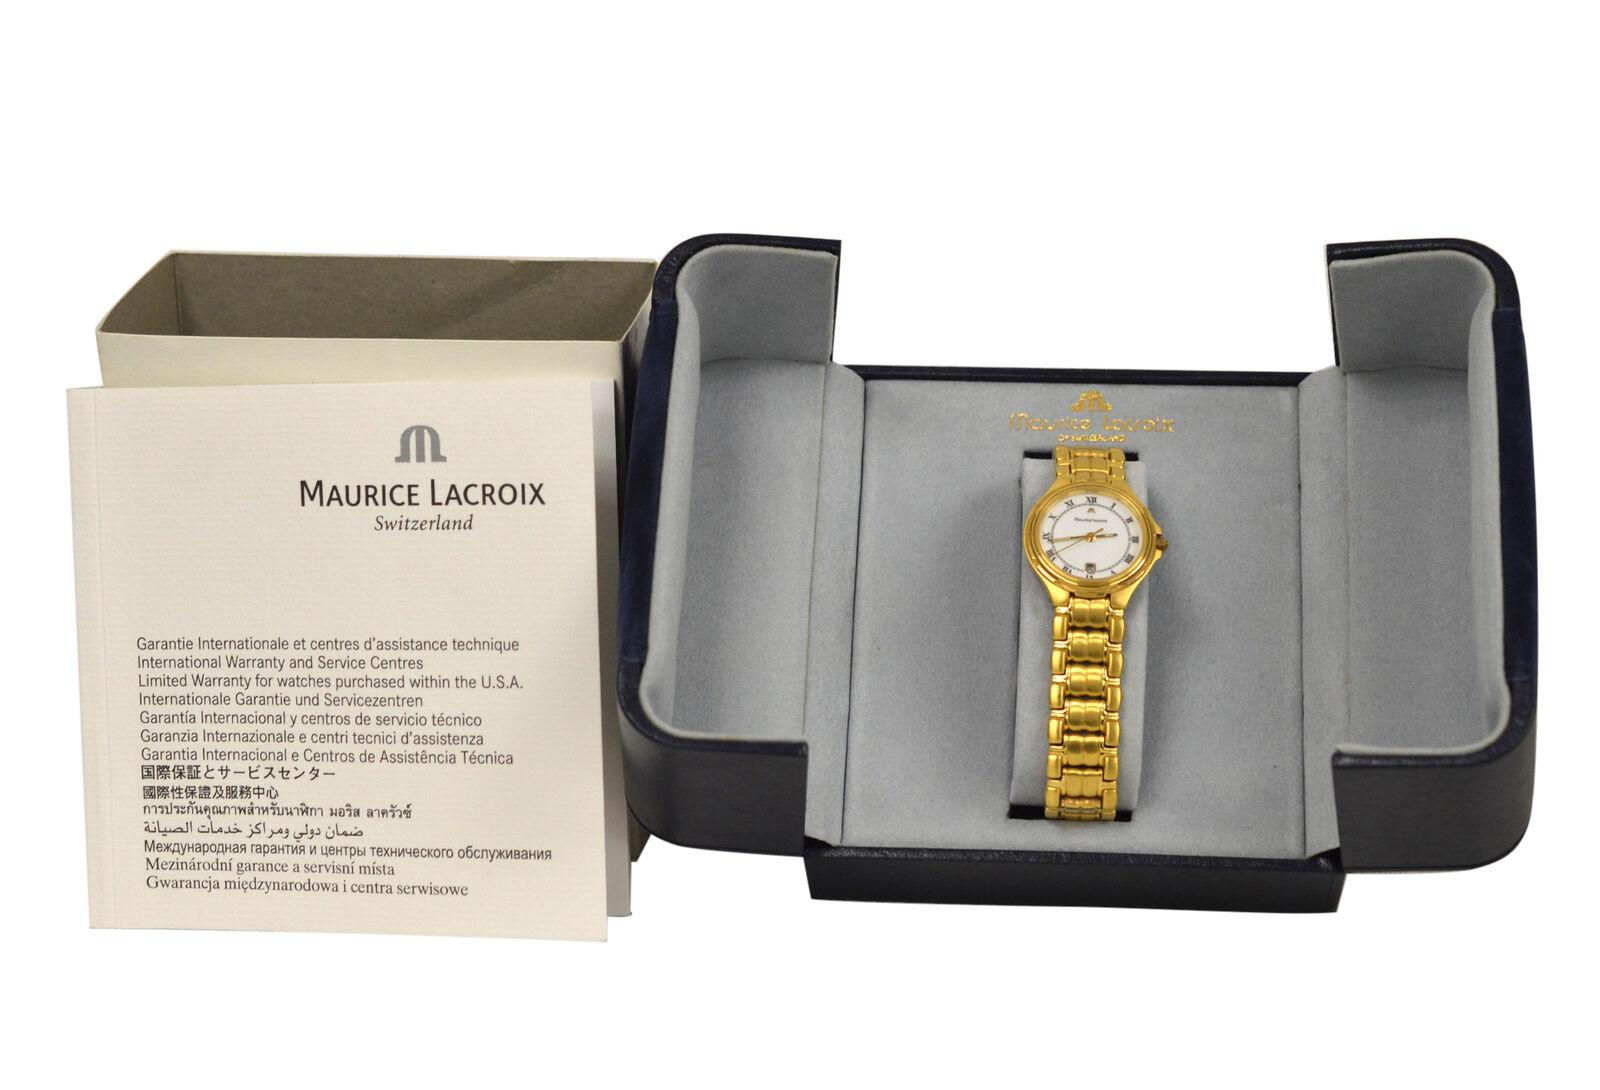 Brand	Maurice Lacroix
Model	79514
Gender	Ladies'
Condition	New Old Stock Store display
Movement	Swiss Quartz
Case Material	Gold Electroplated Stainless Steel
Bracelet / Strap Material	
Gold Electroplated Stainless Steel

Clasp / Buckle